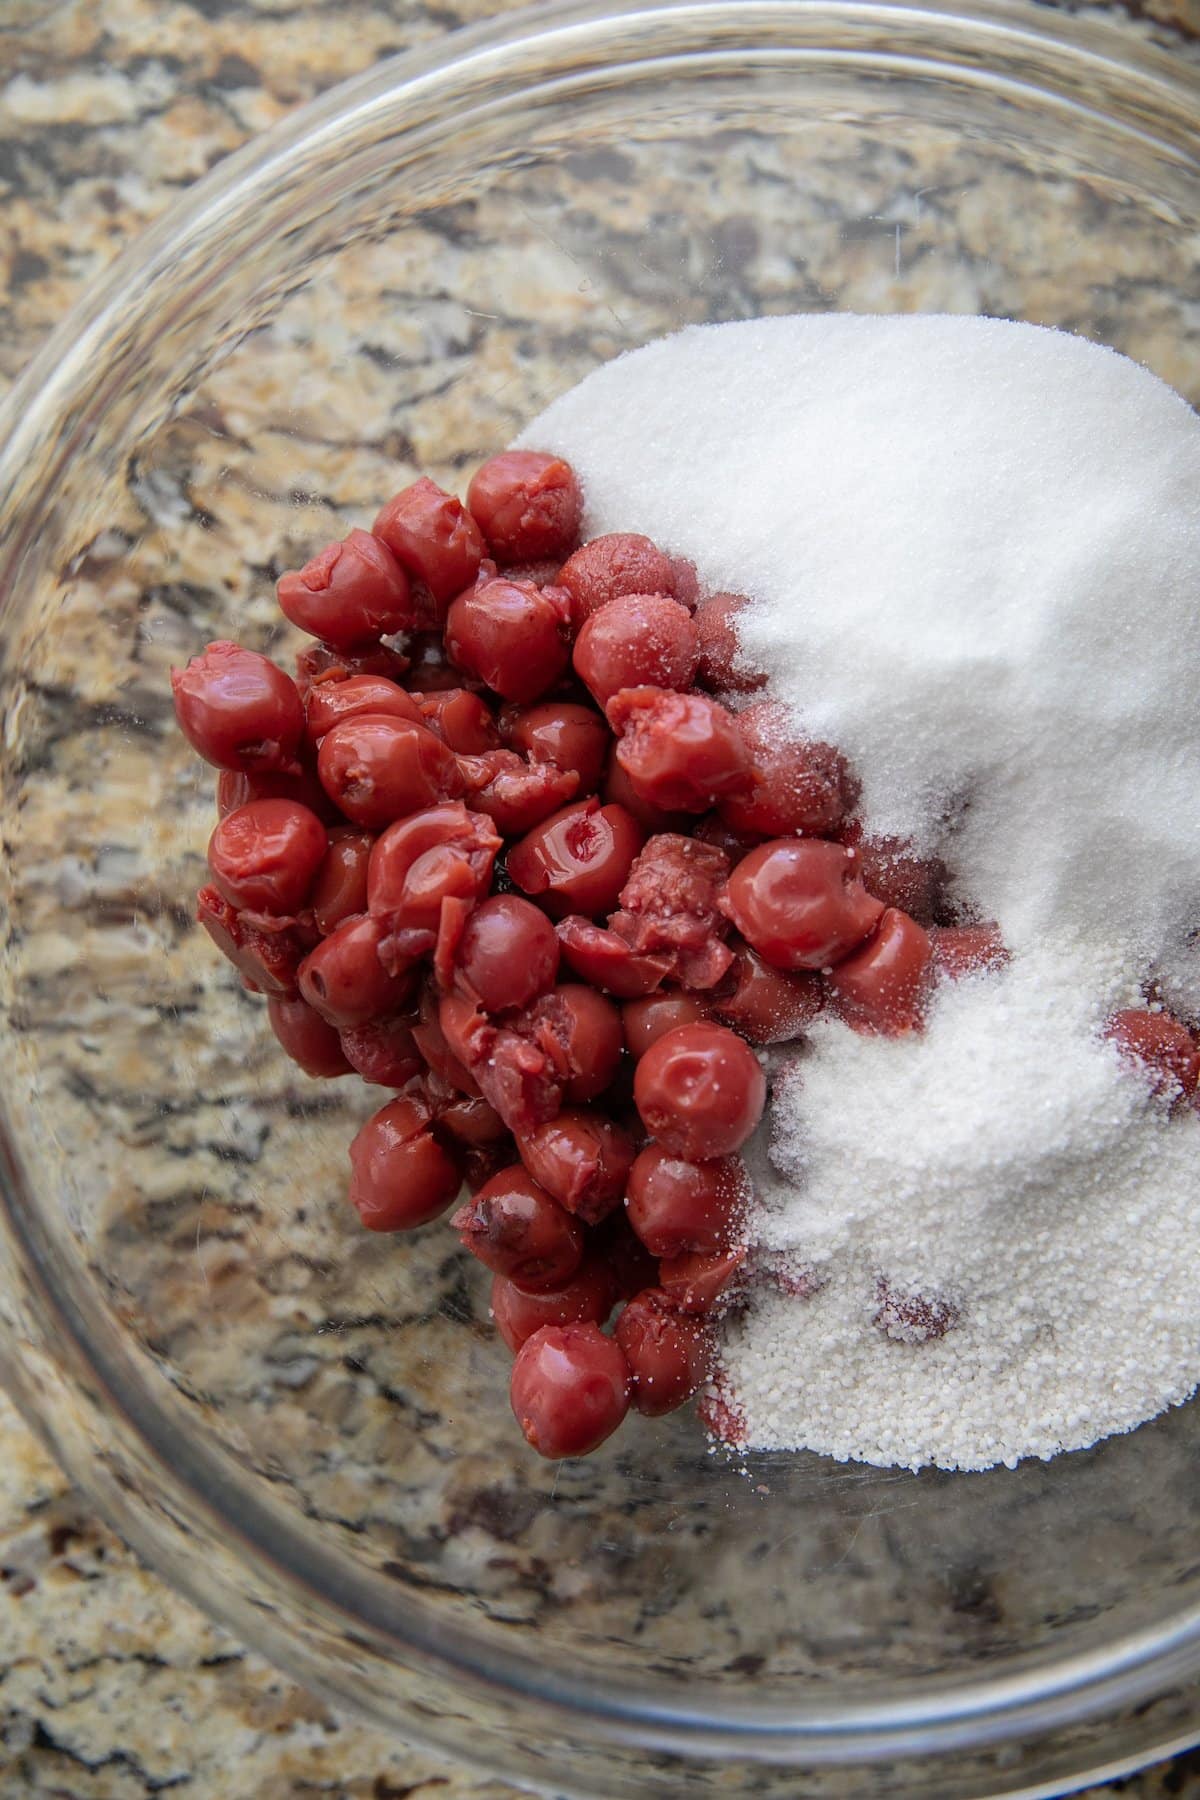 cherries, sugar, tapioca and other ingredients in a glass bowl